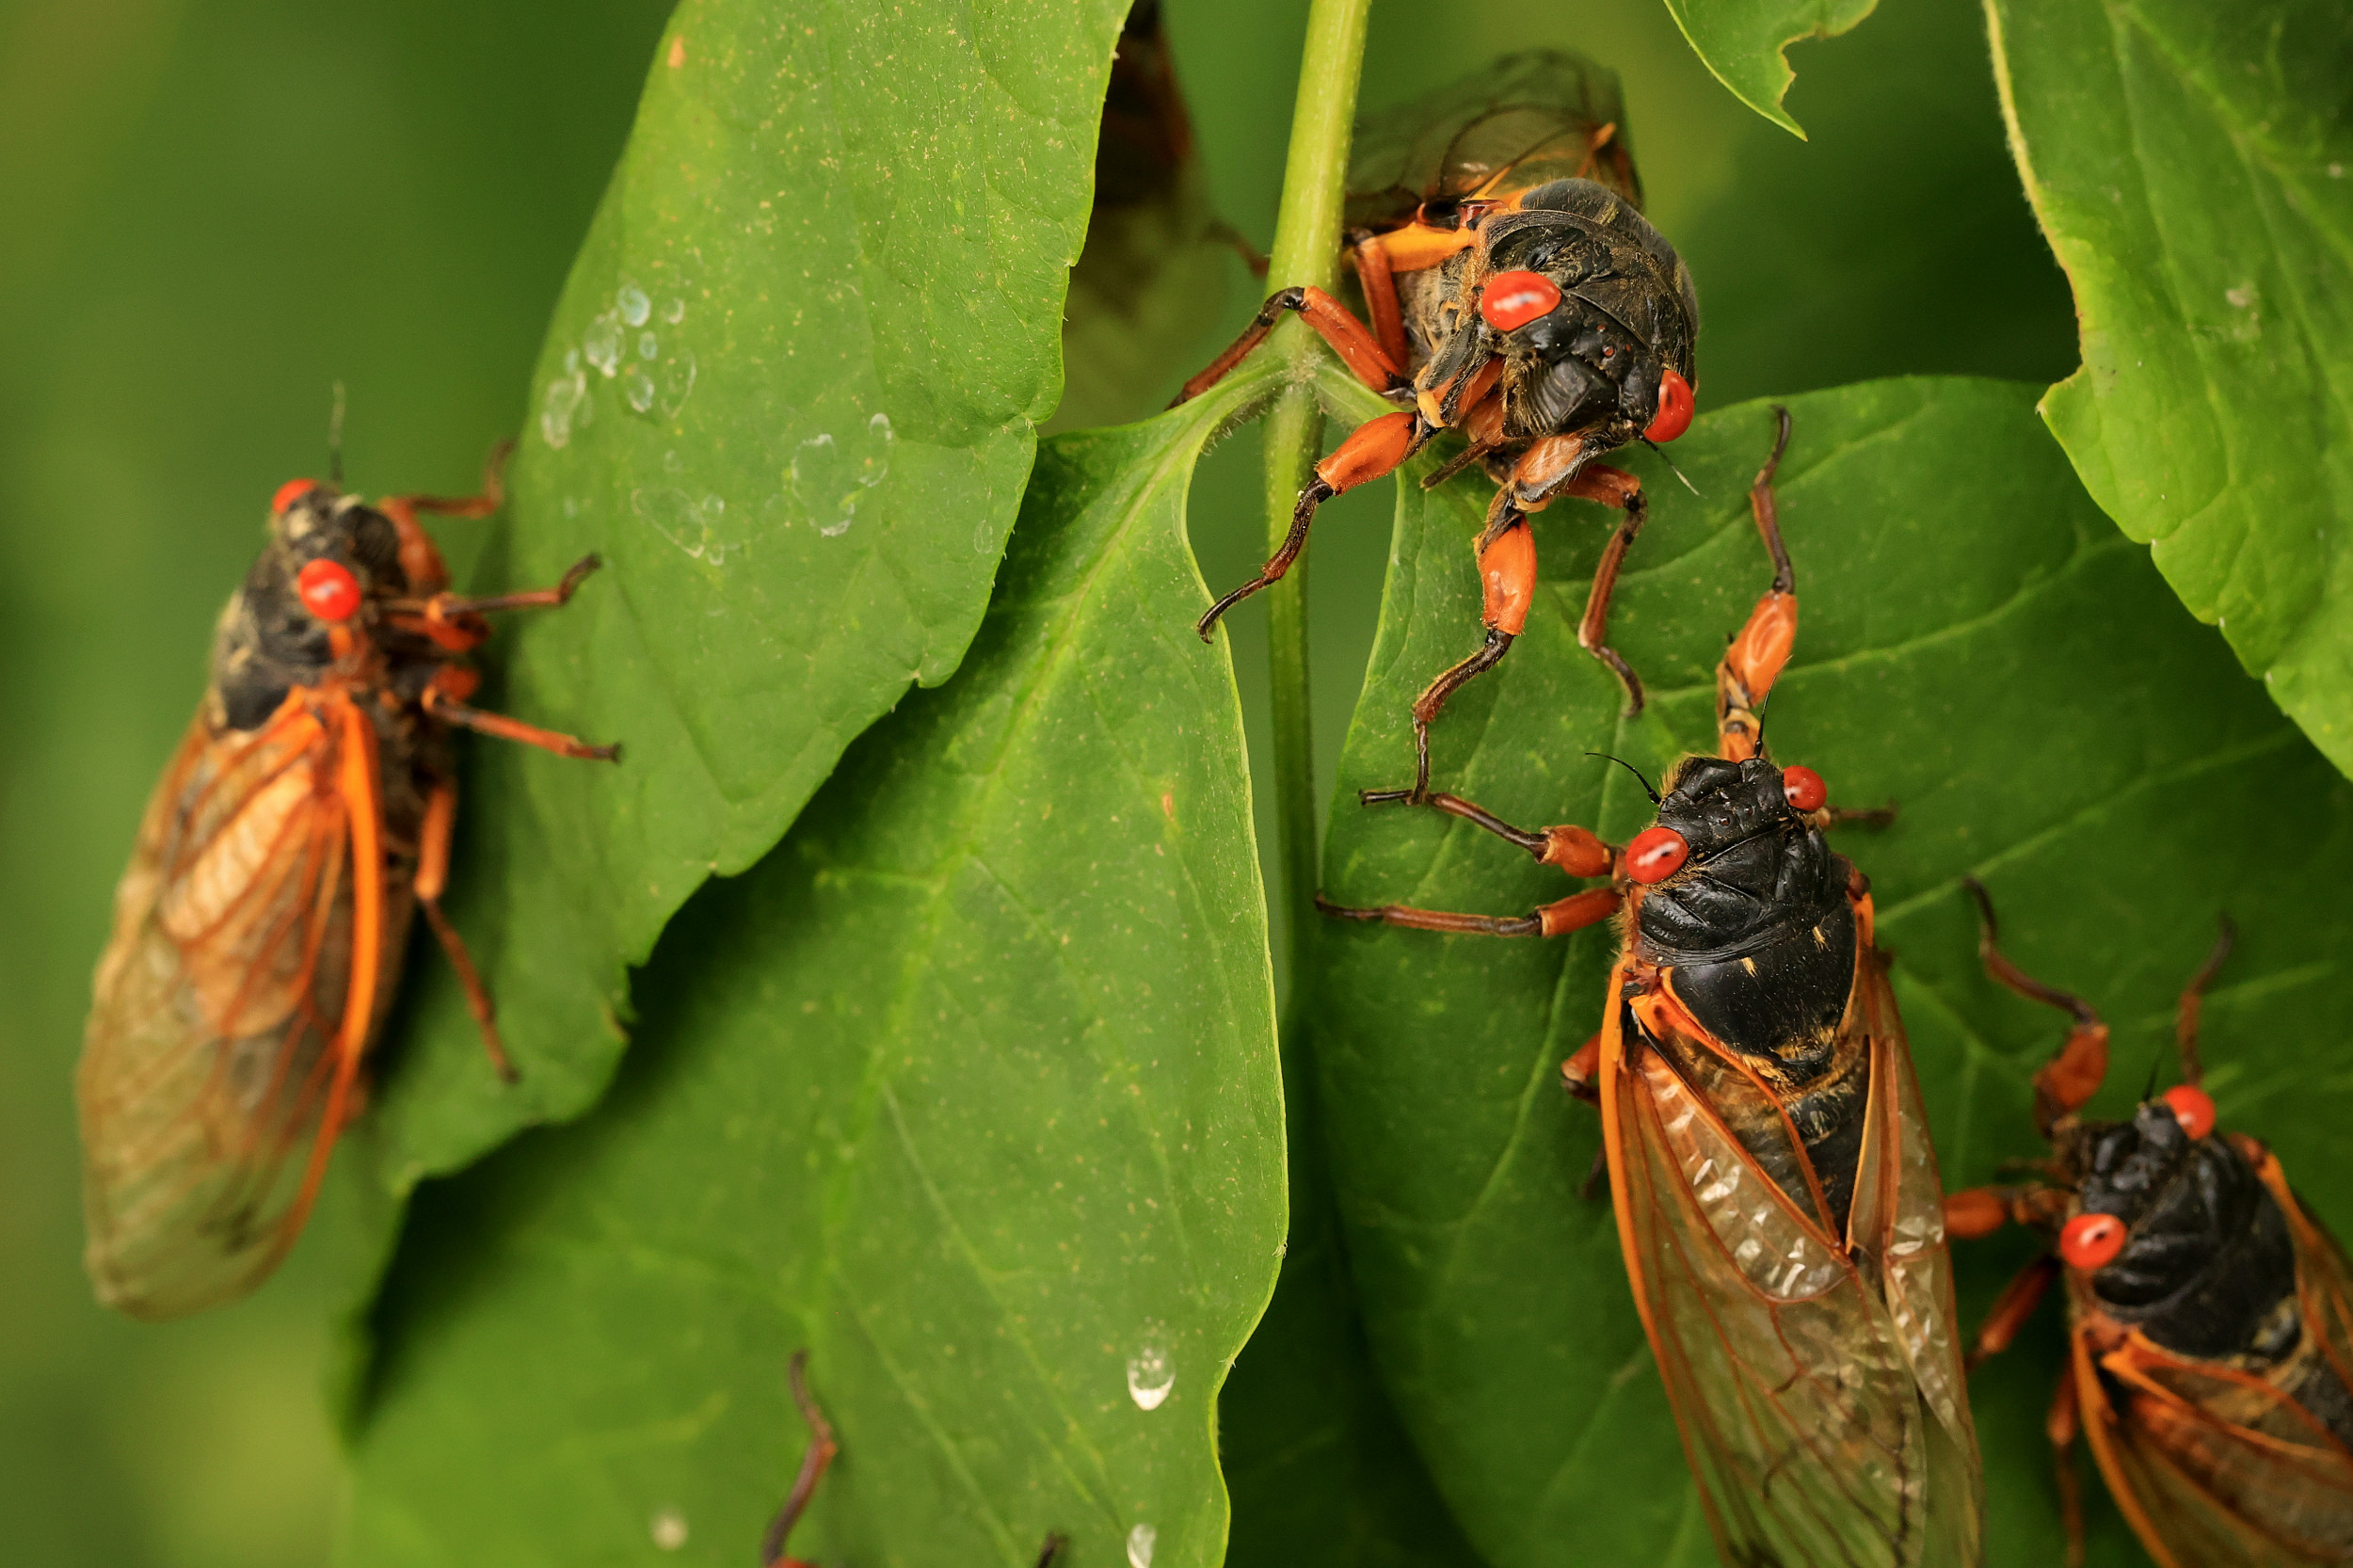 Police Say A Cicada Is Responsible For A Car Crash In Ohio